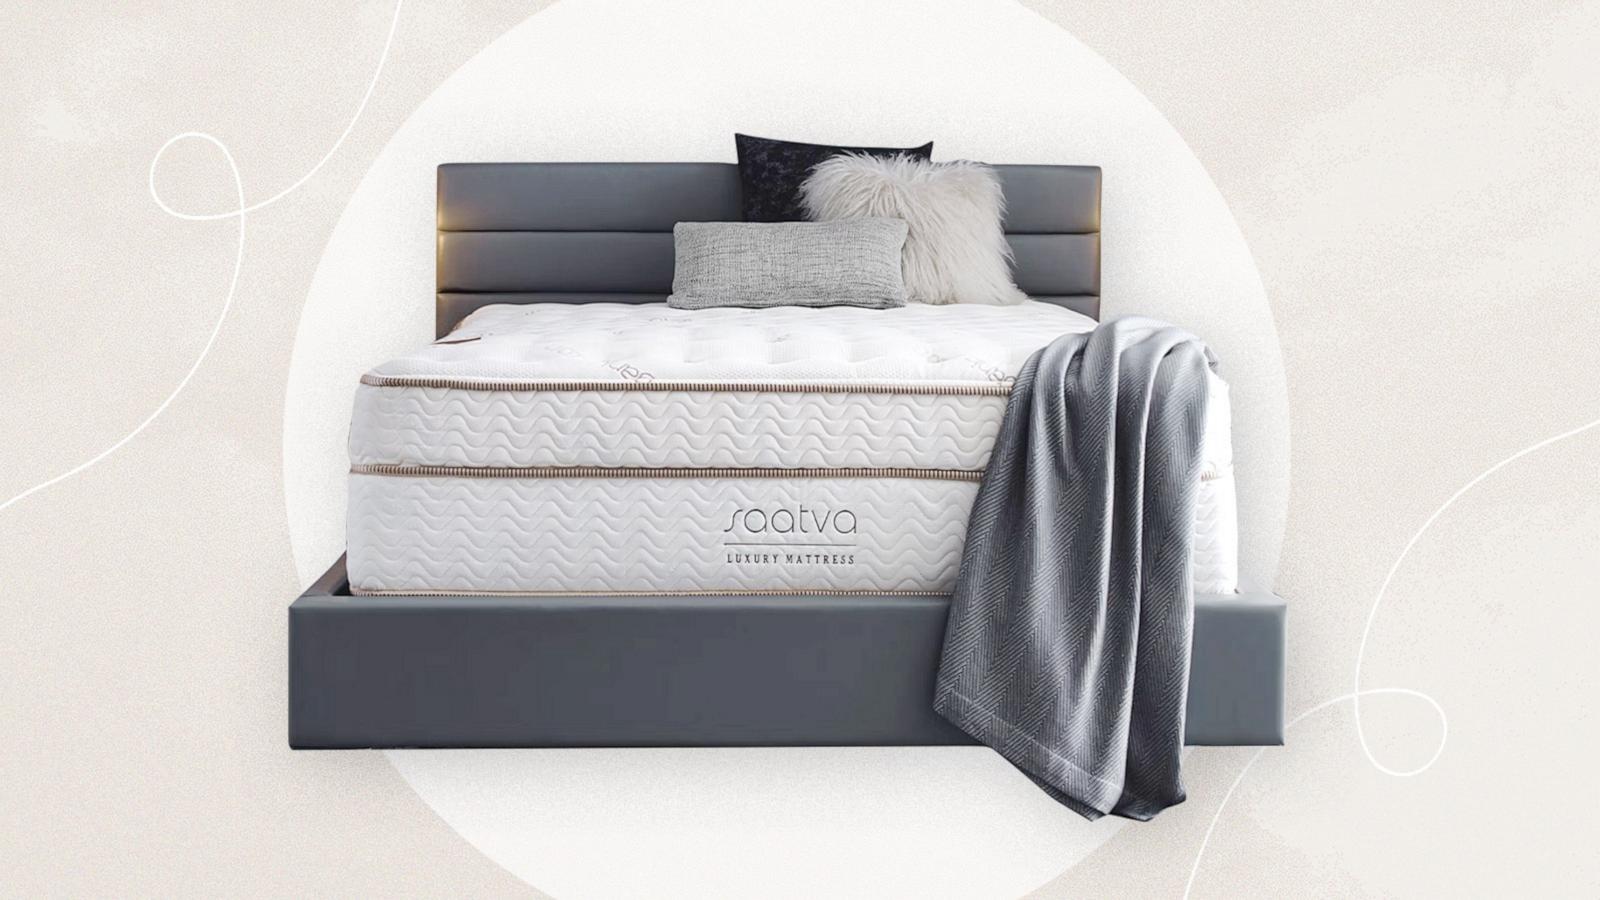 Shop these mattresses we love, as recommended by experts